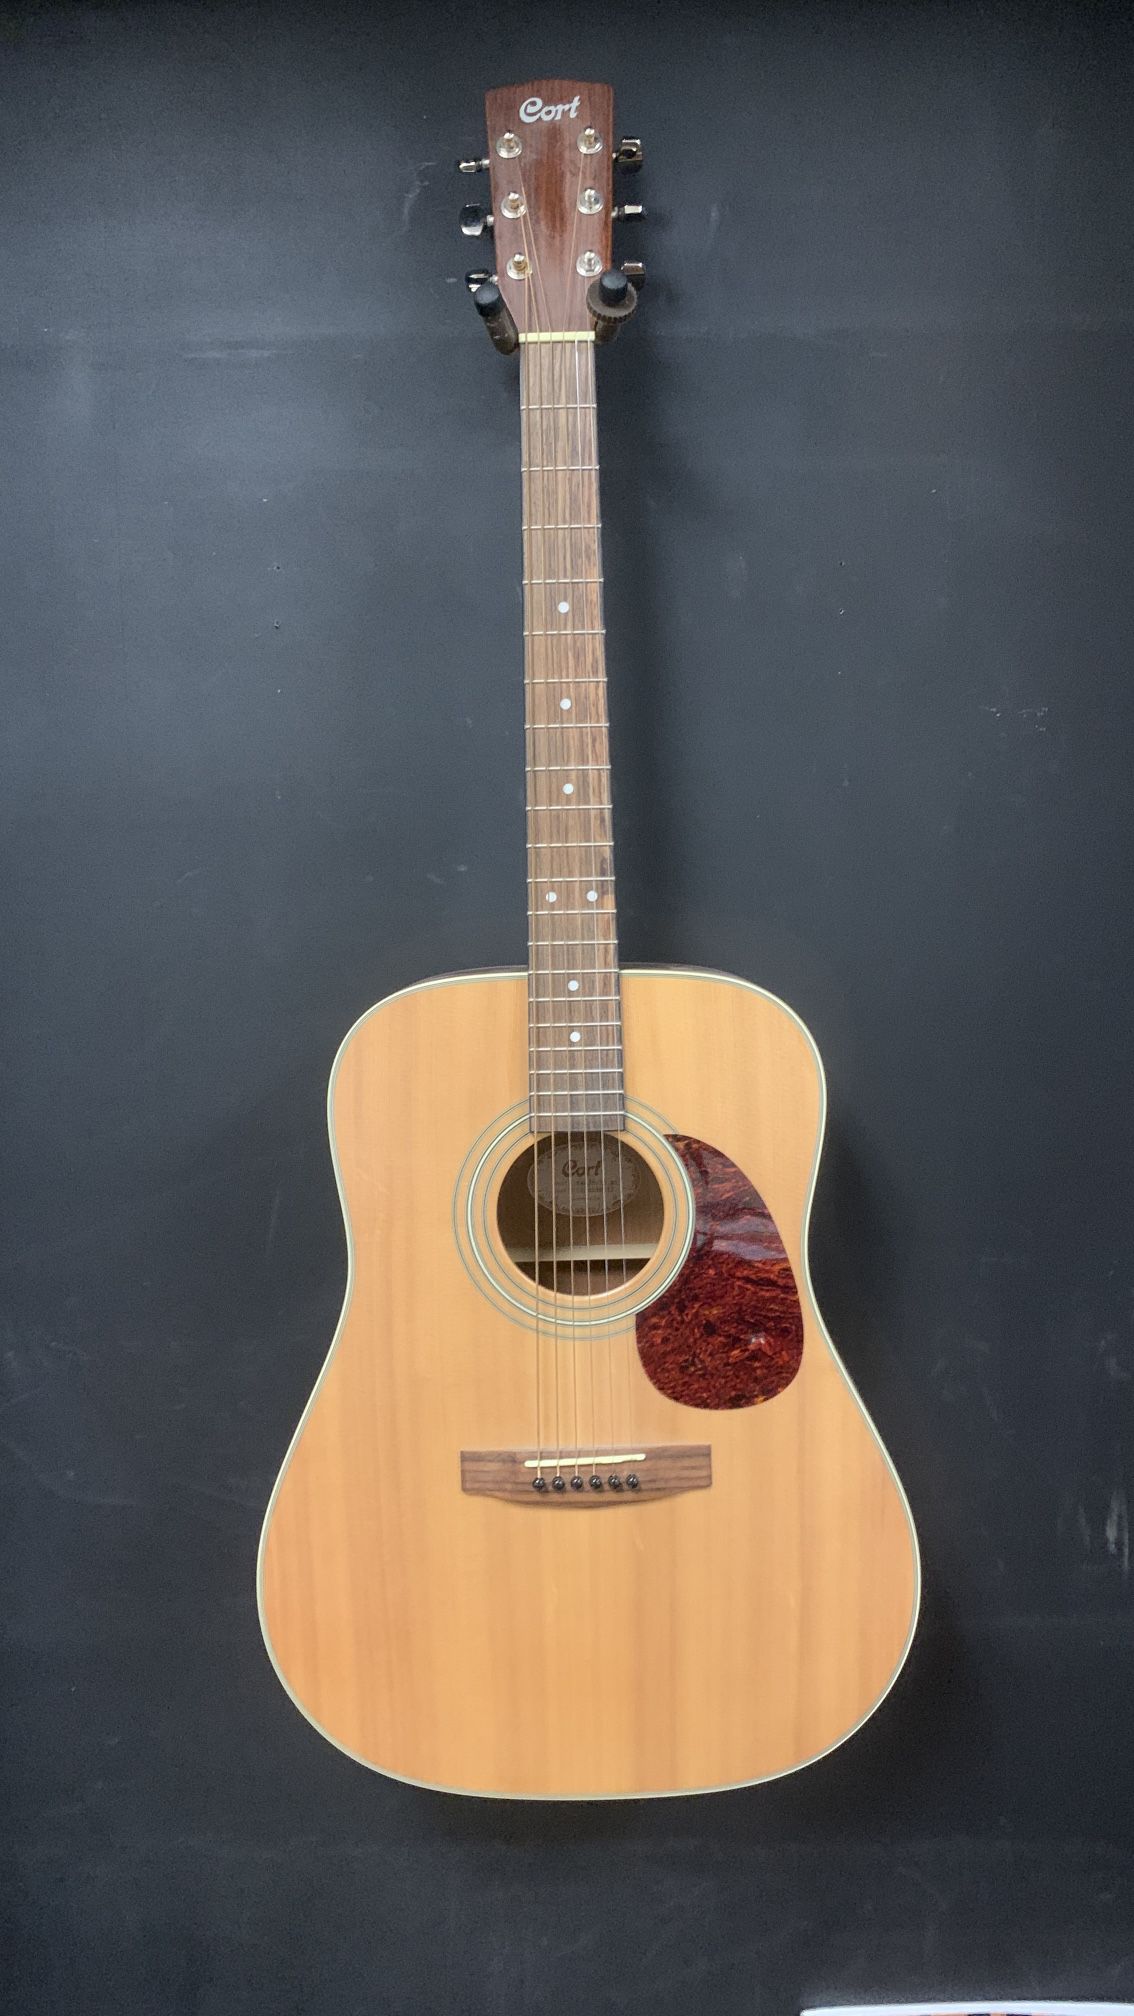 Cort Earth 70ns Acoustic Guitar 